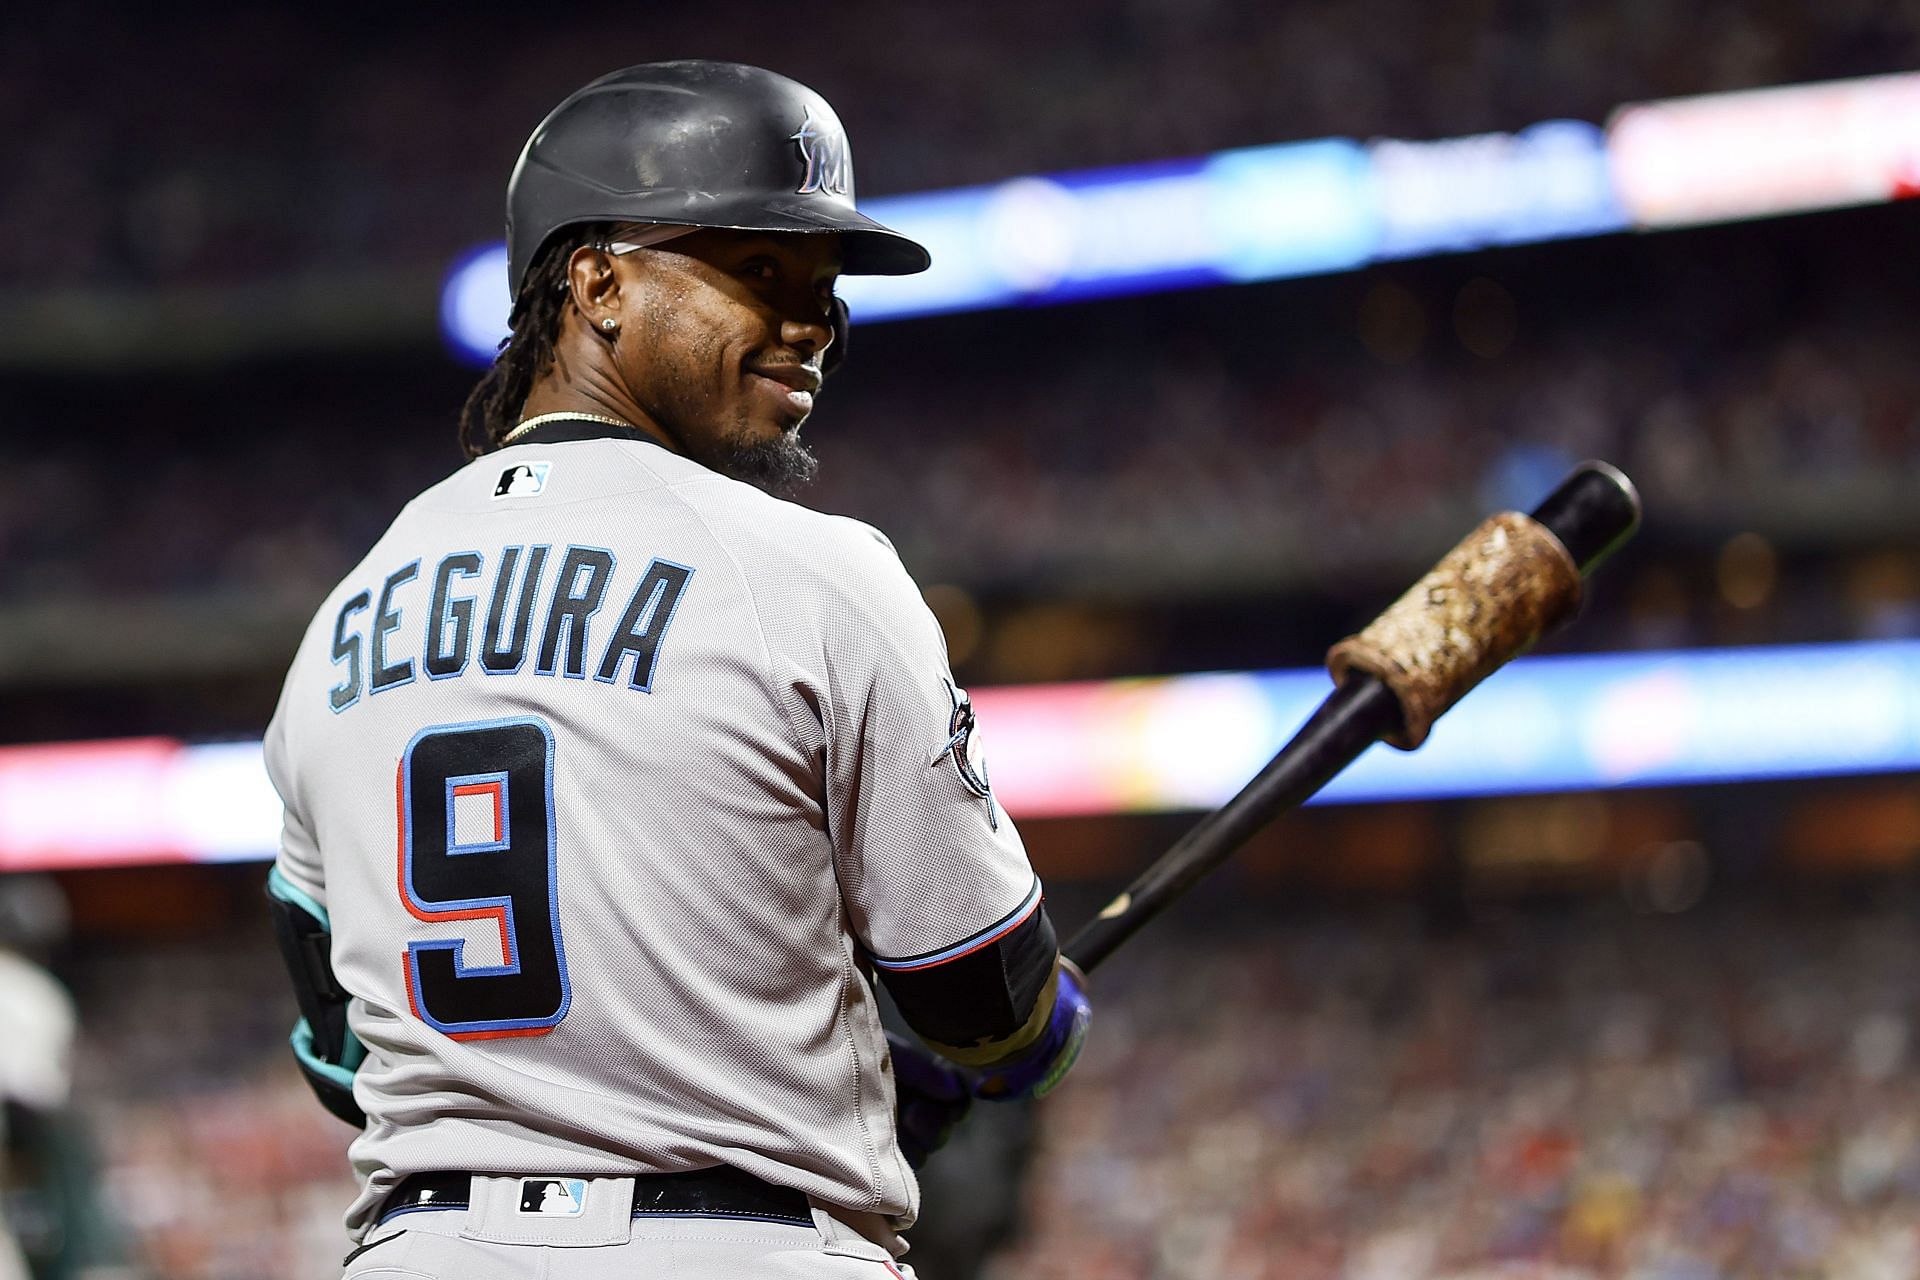 LA Angels: Could the Jean Segura signing open up a trade for a